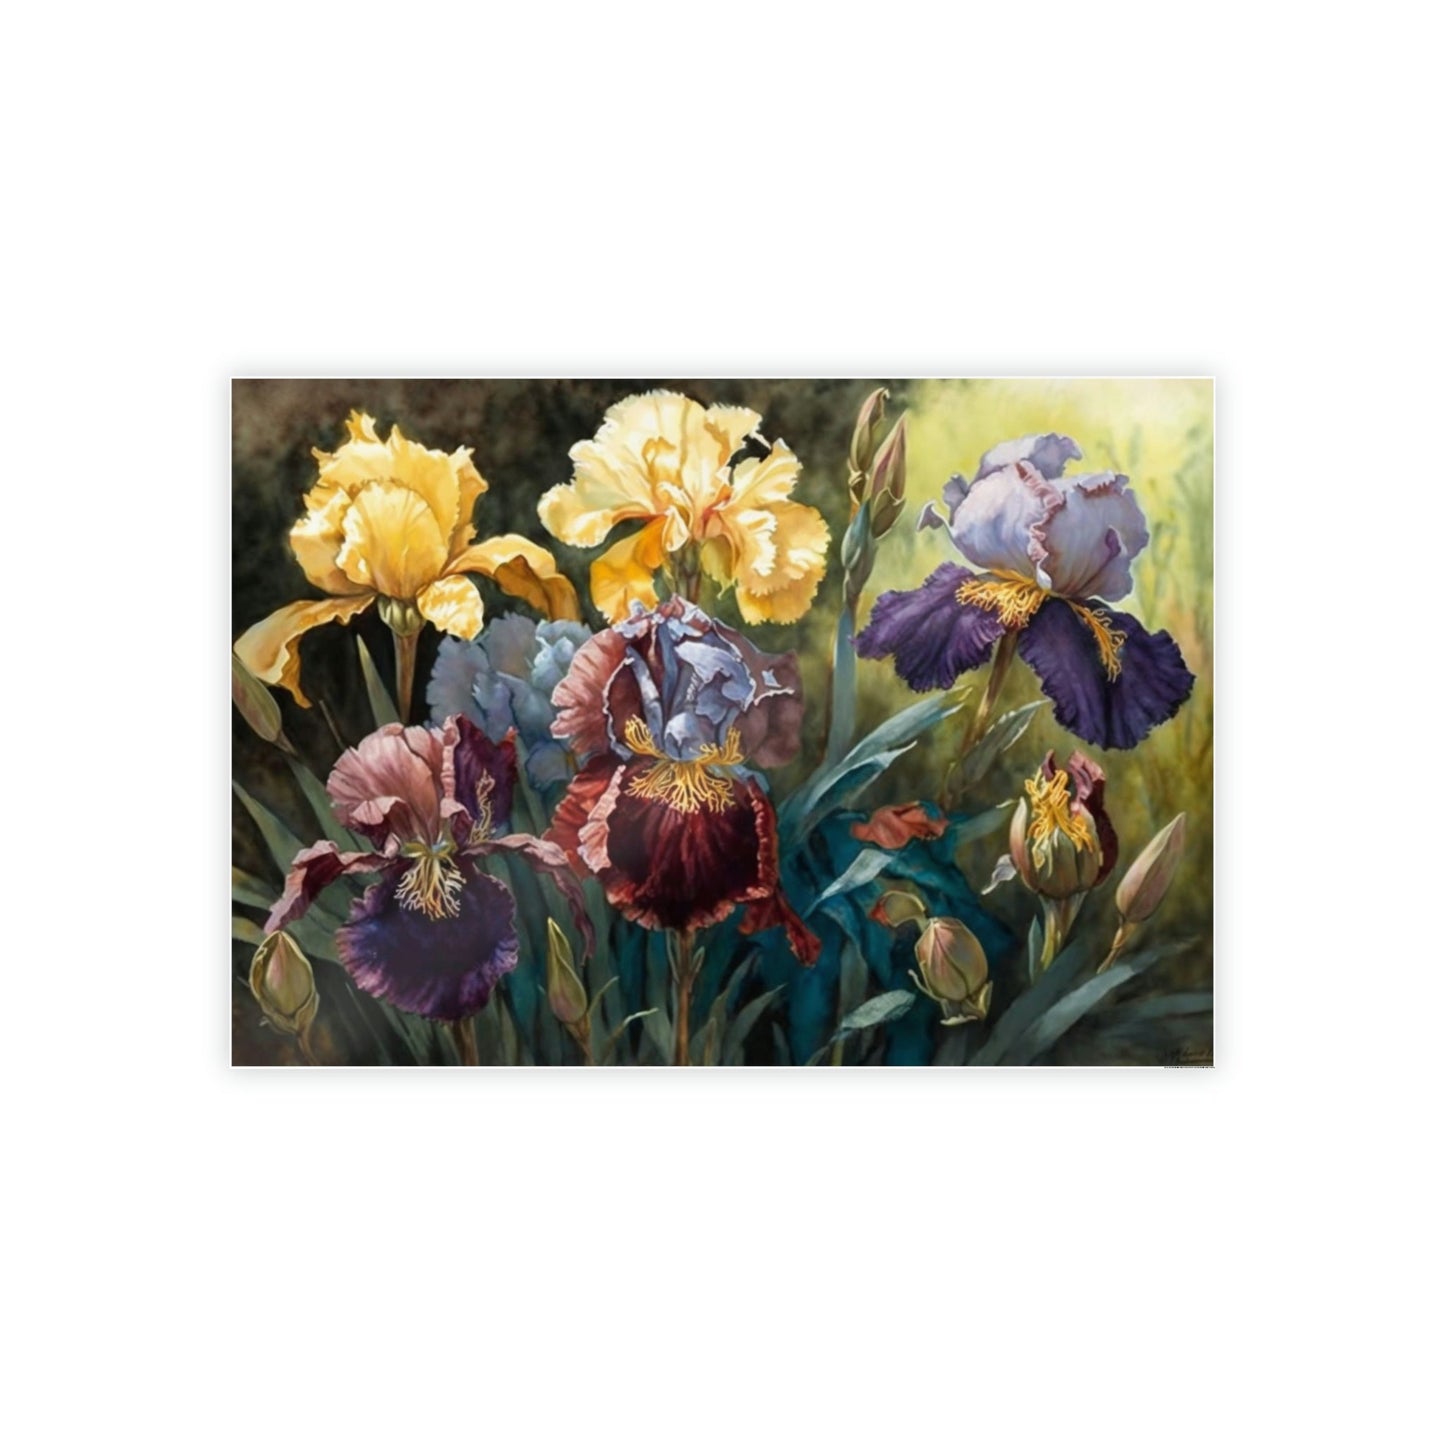 Iris Dance: A Canvas of Petals in Motion